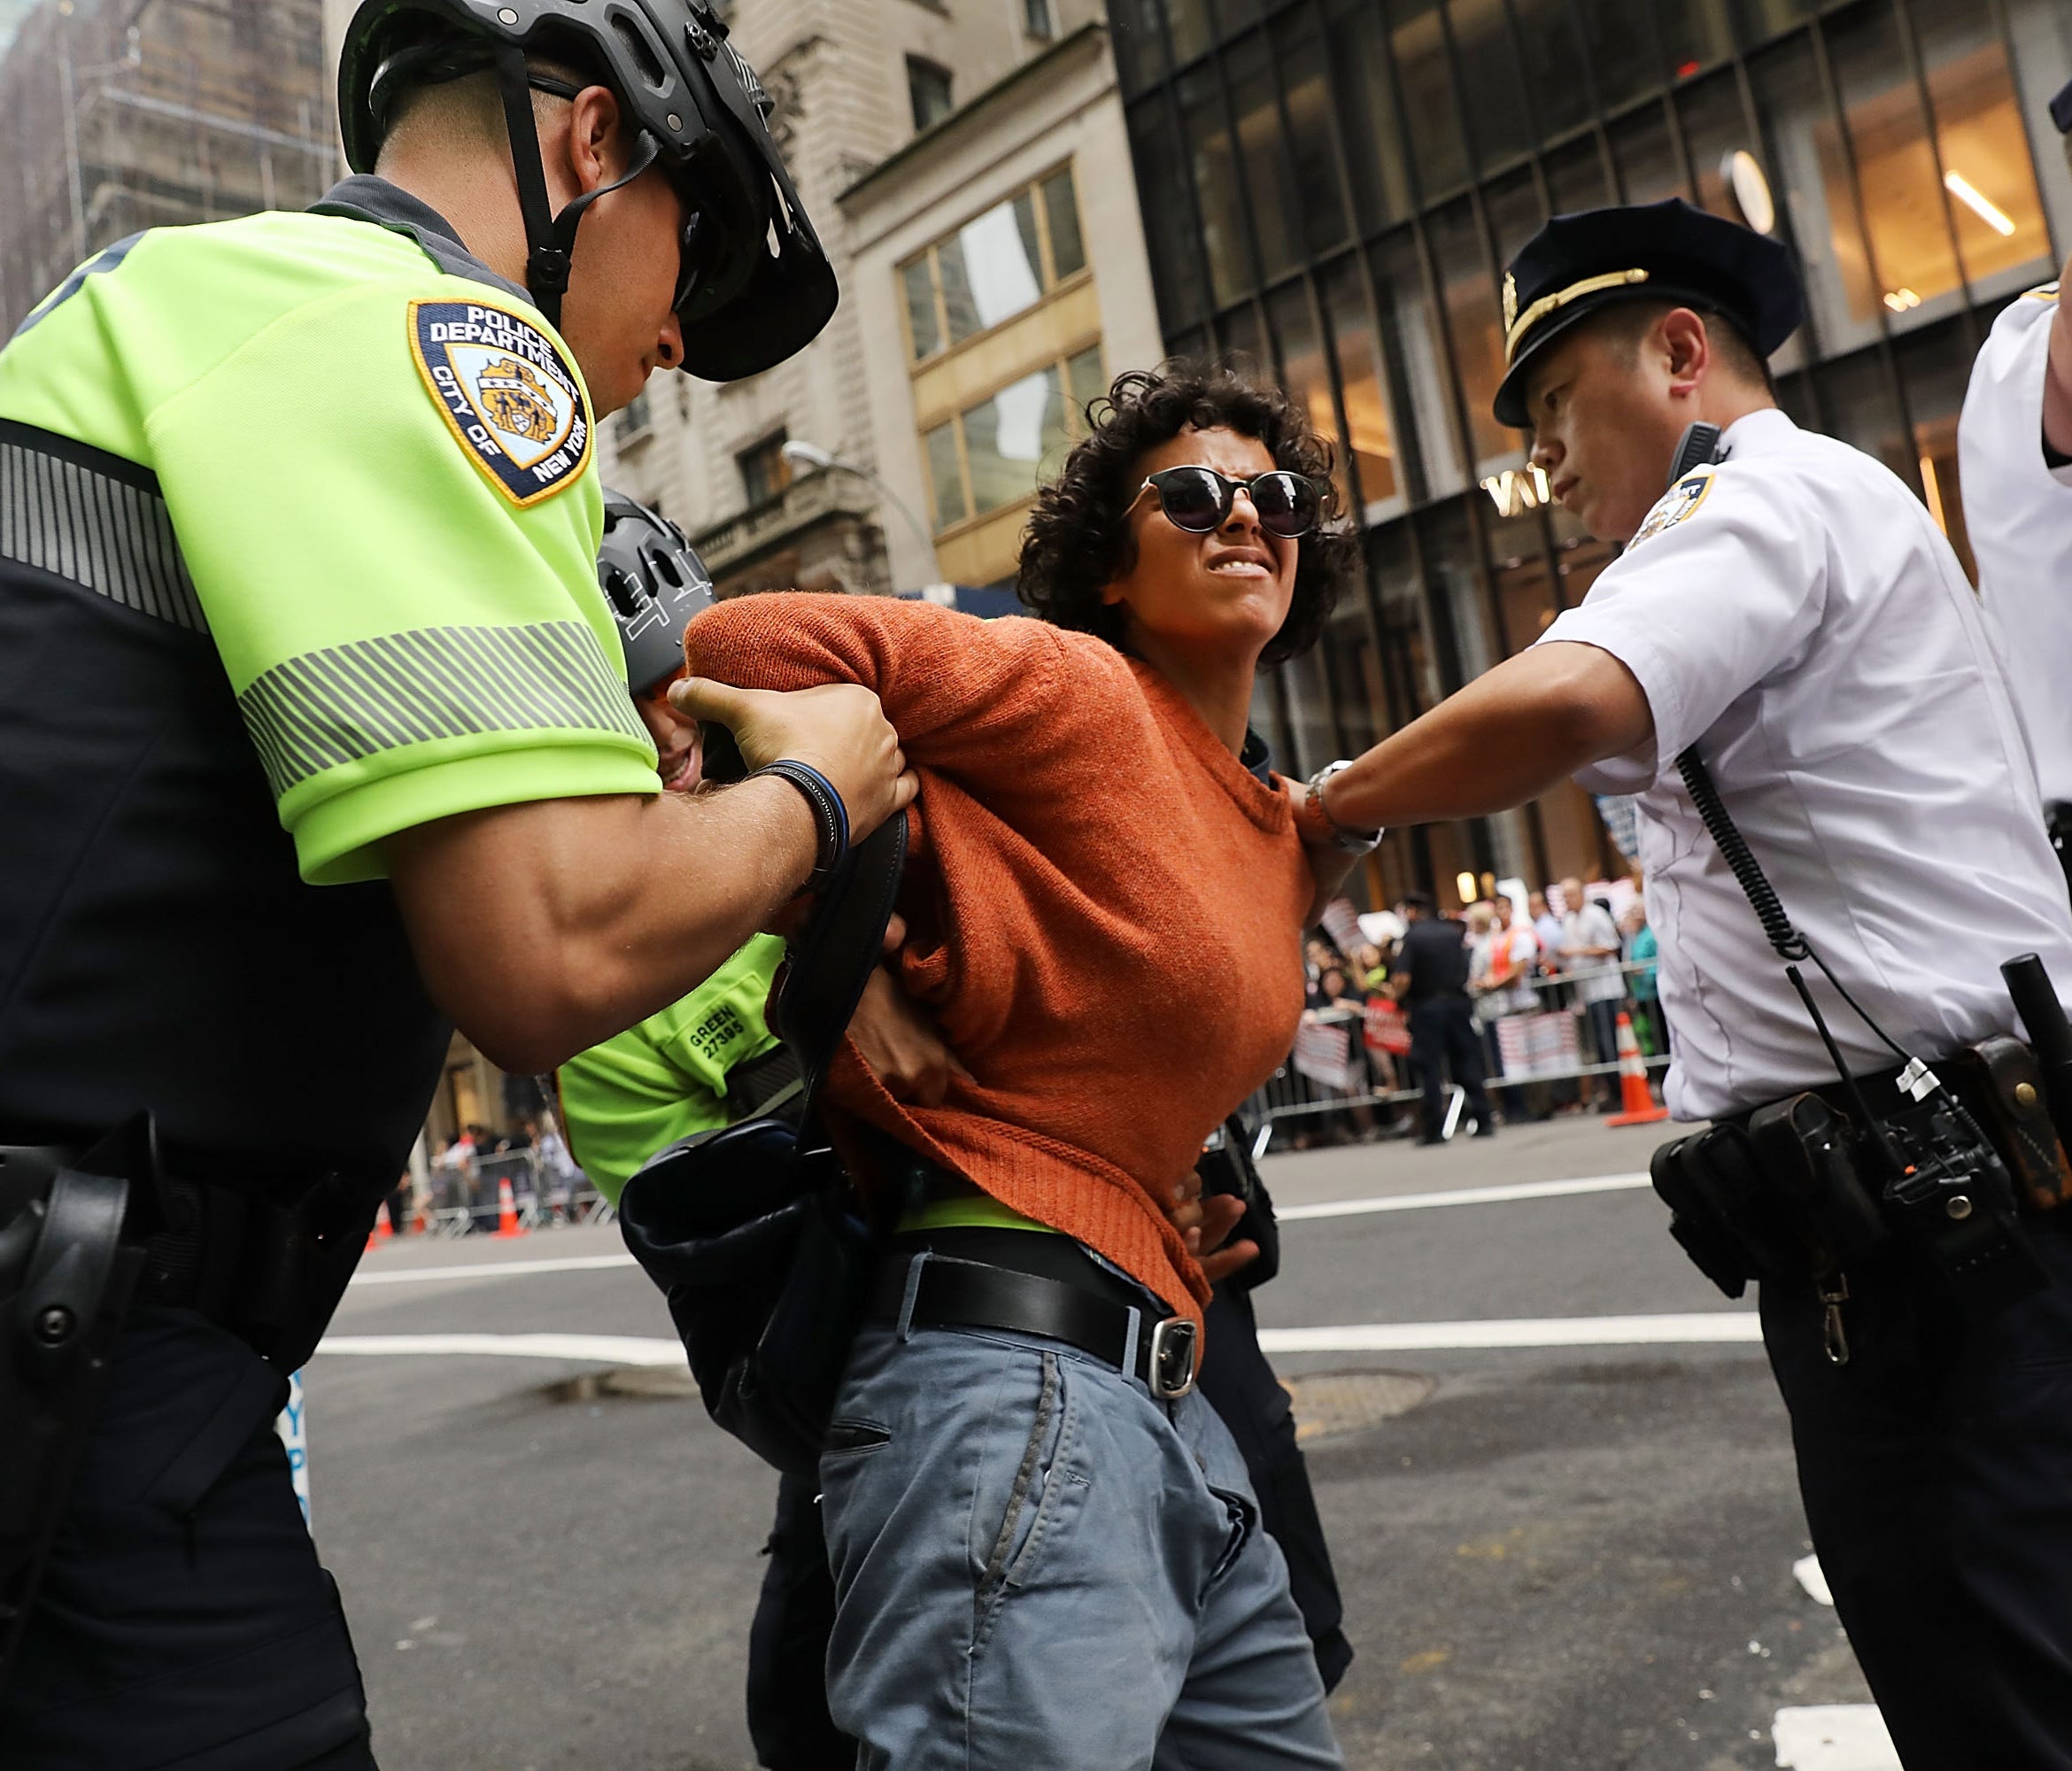 A woman is arrested during a pro-immigration rally outside of Trump Tower along Fifth Avenue on August 15, 2017, in New York City.